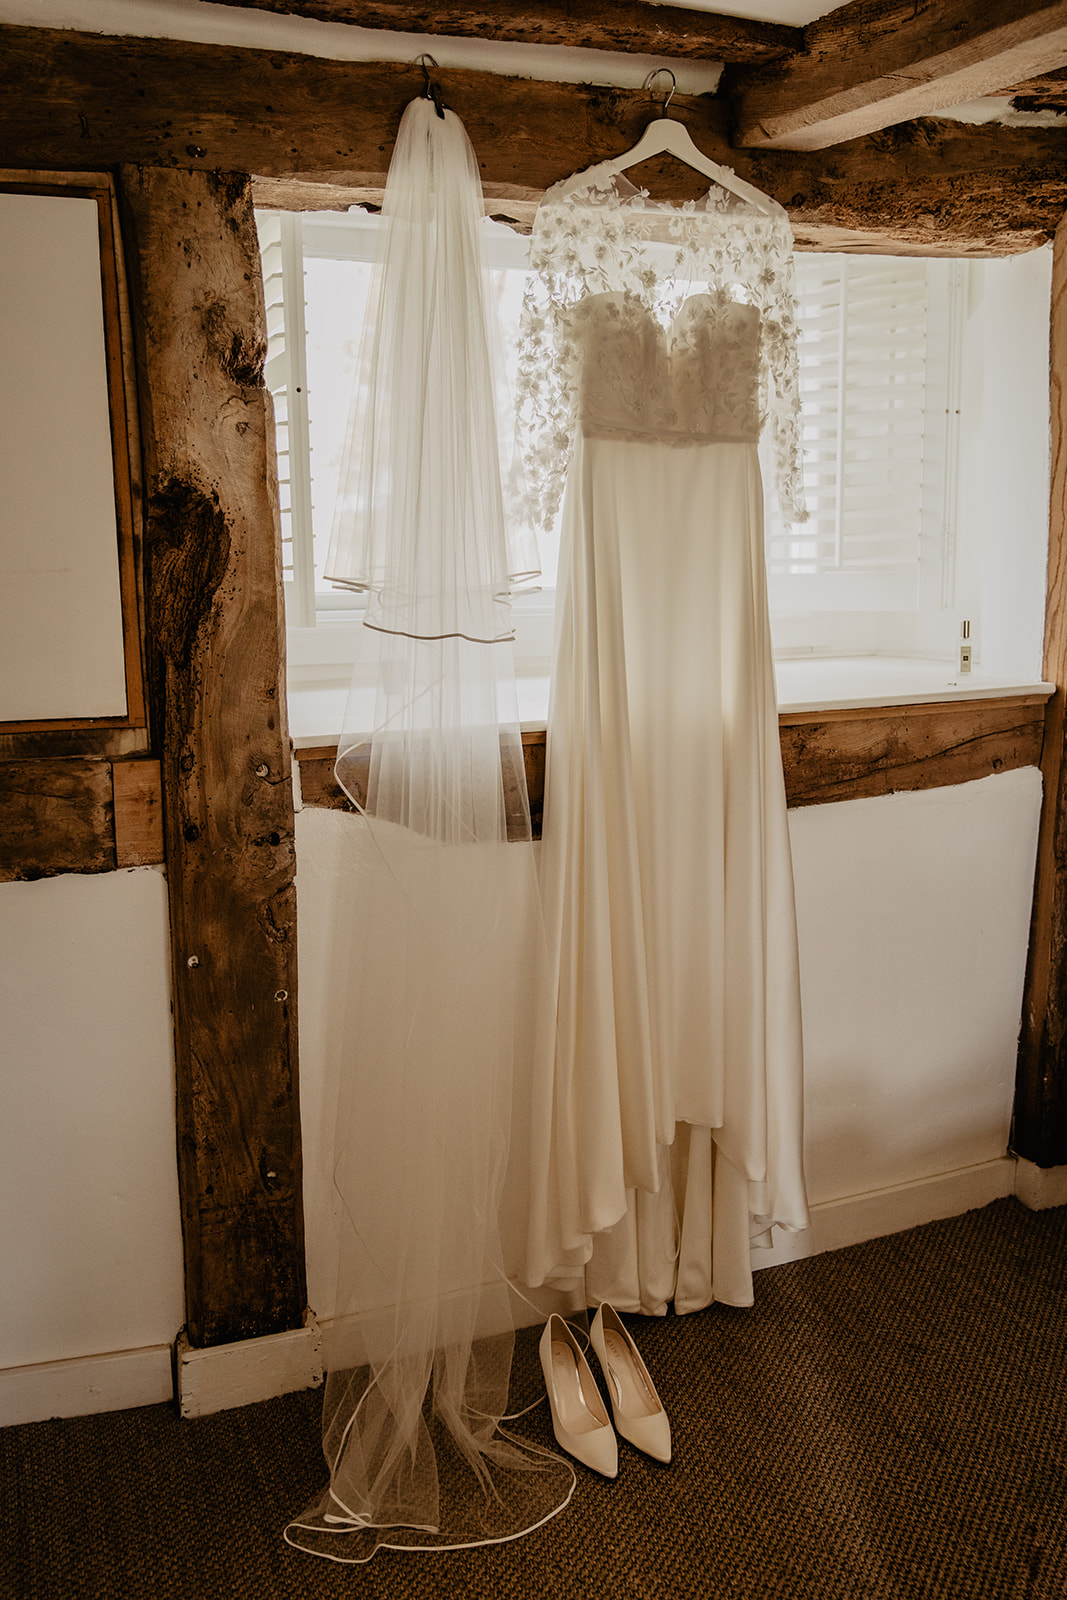 Wedding Dress hanging at a Secret Barn Wedding, West Sussex. By Olive Joy Photography